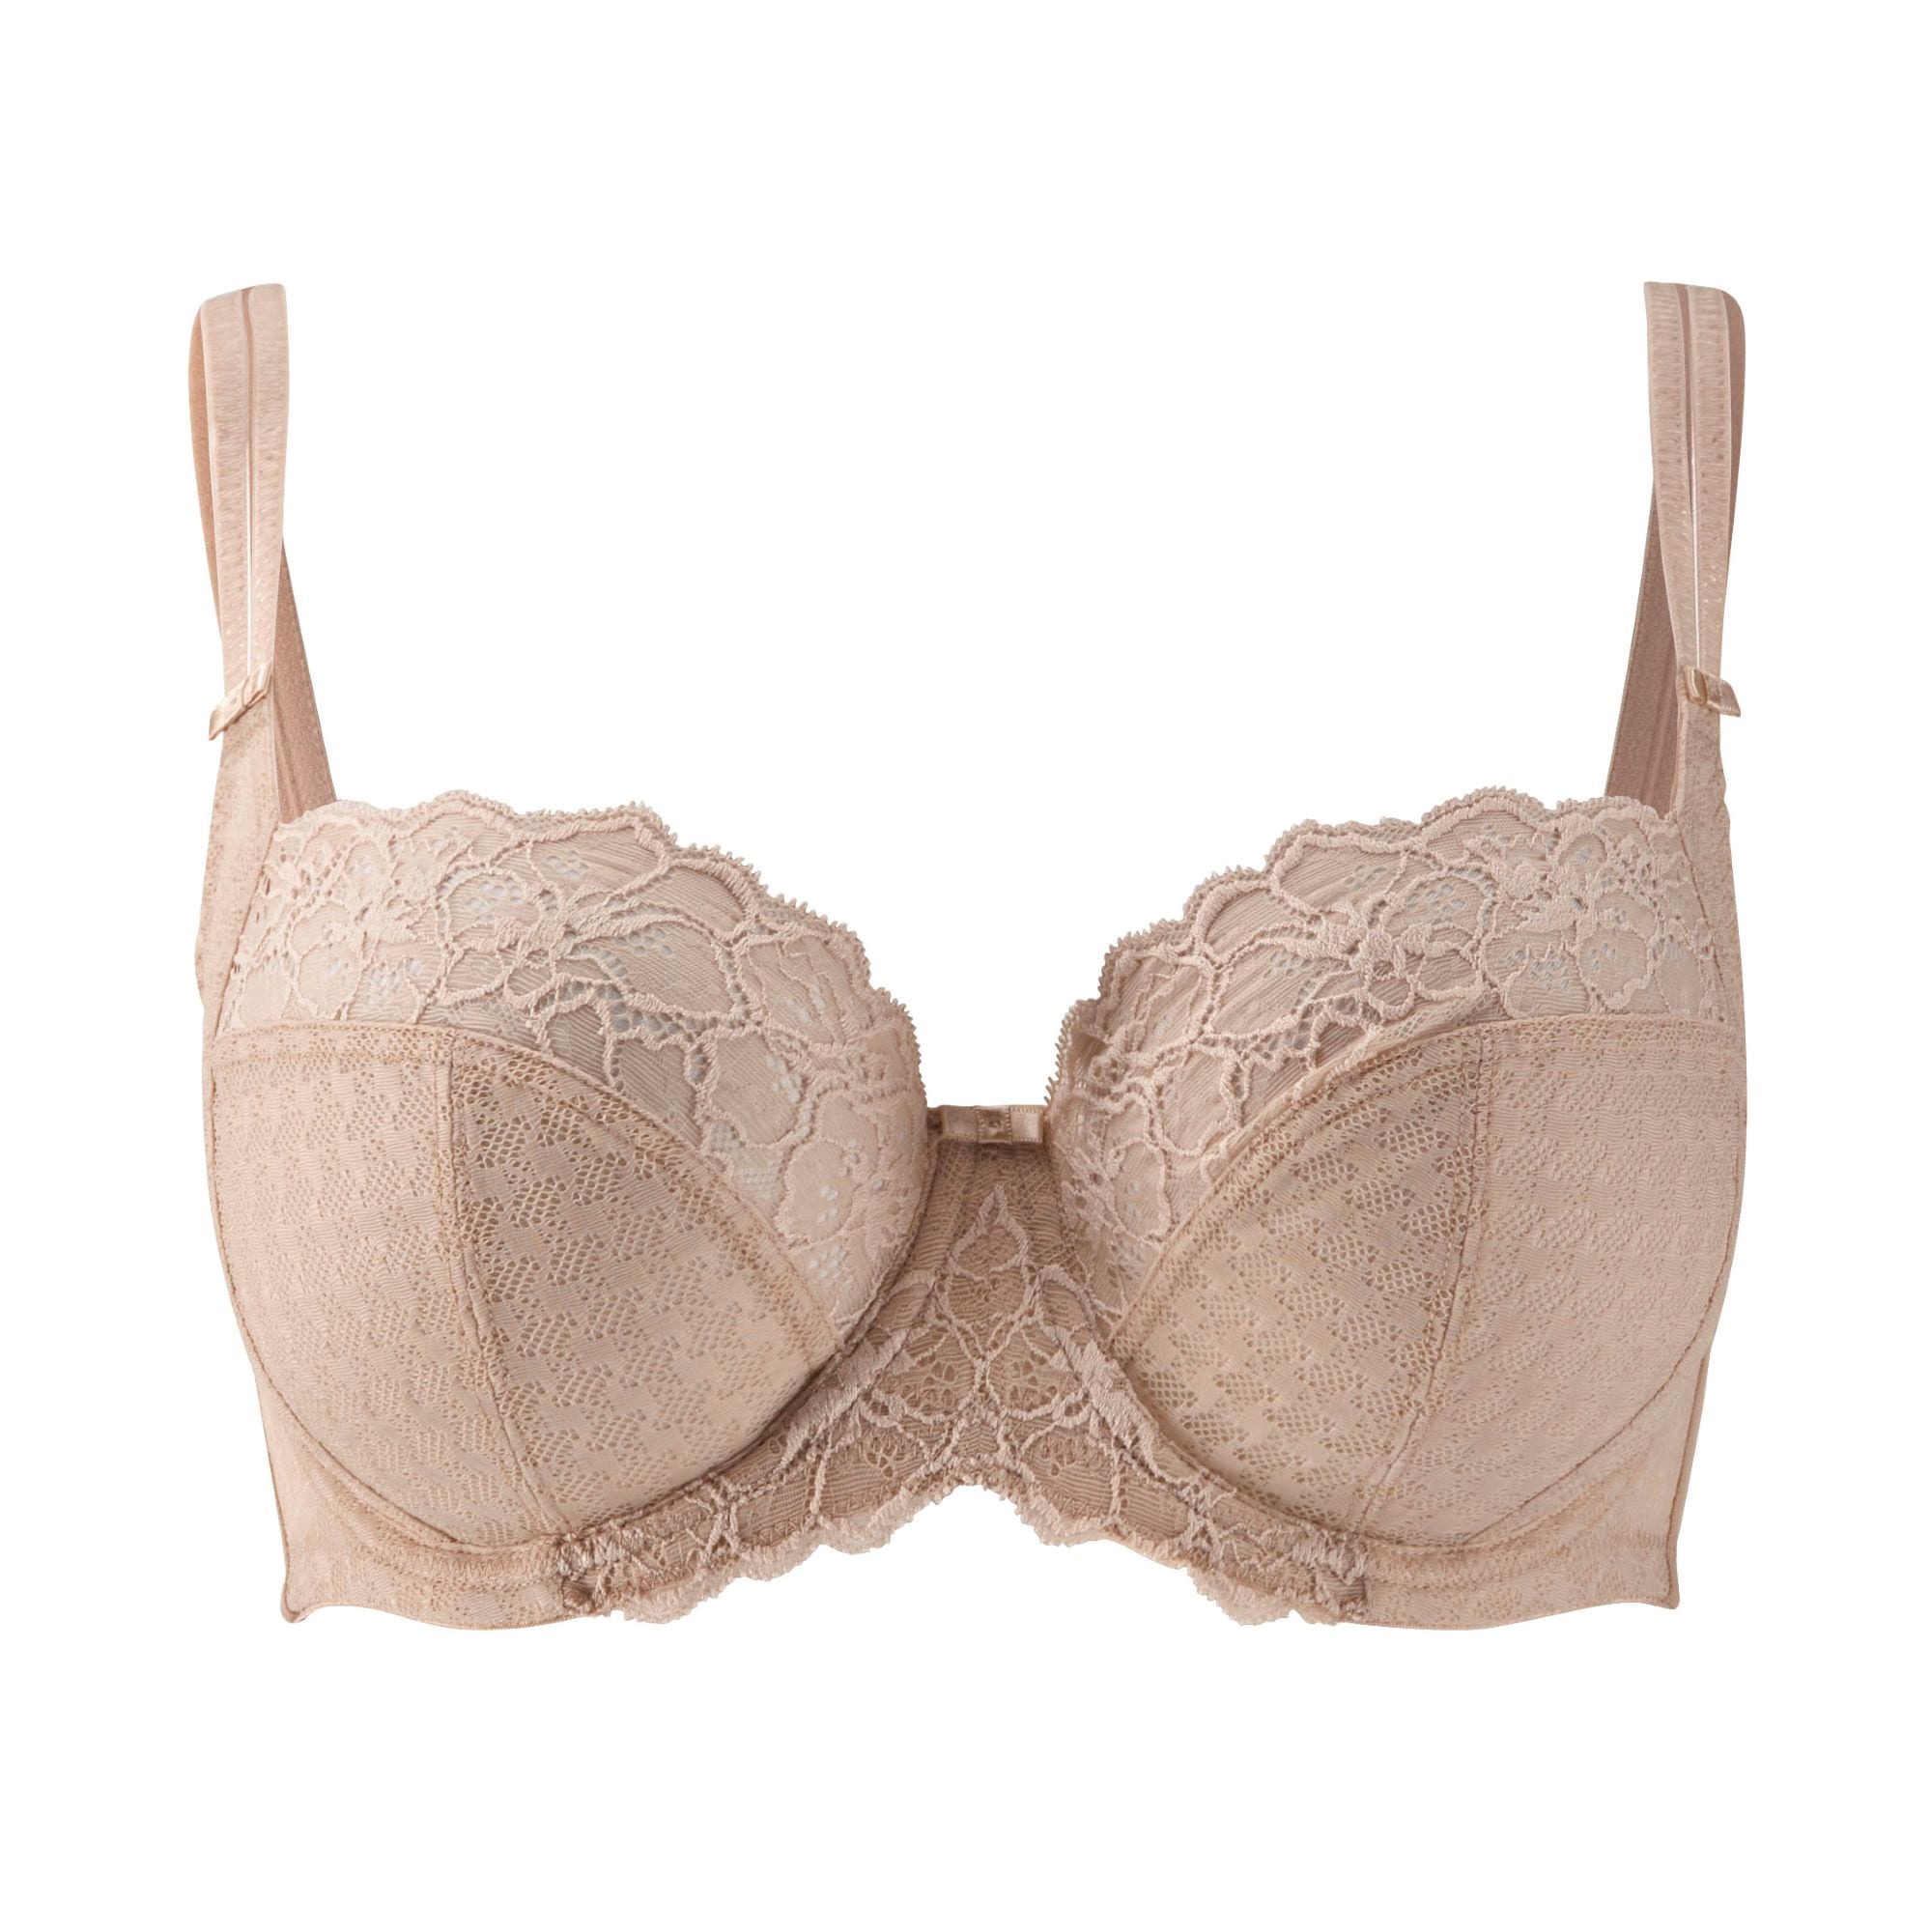 Panache Envy Full Cup Bra in Ivory - Busted Bra Shop